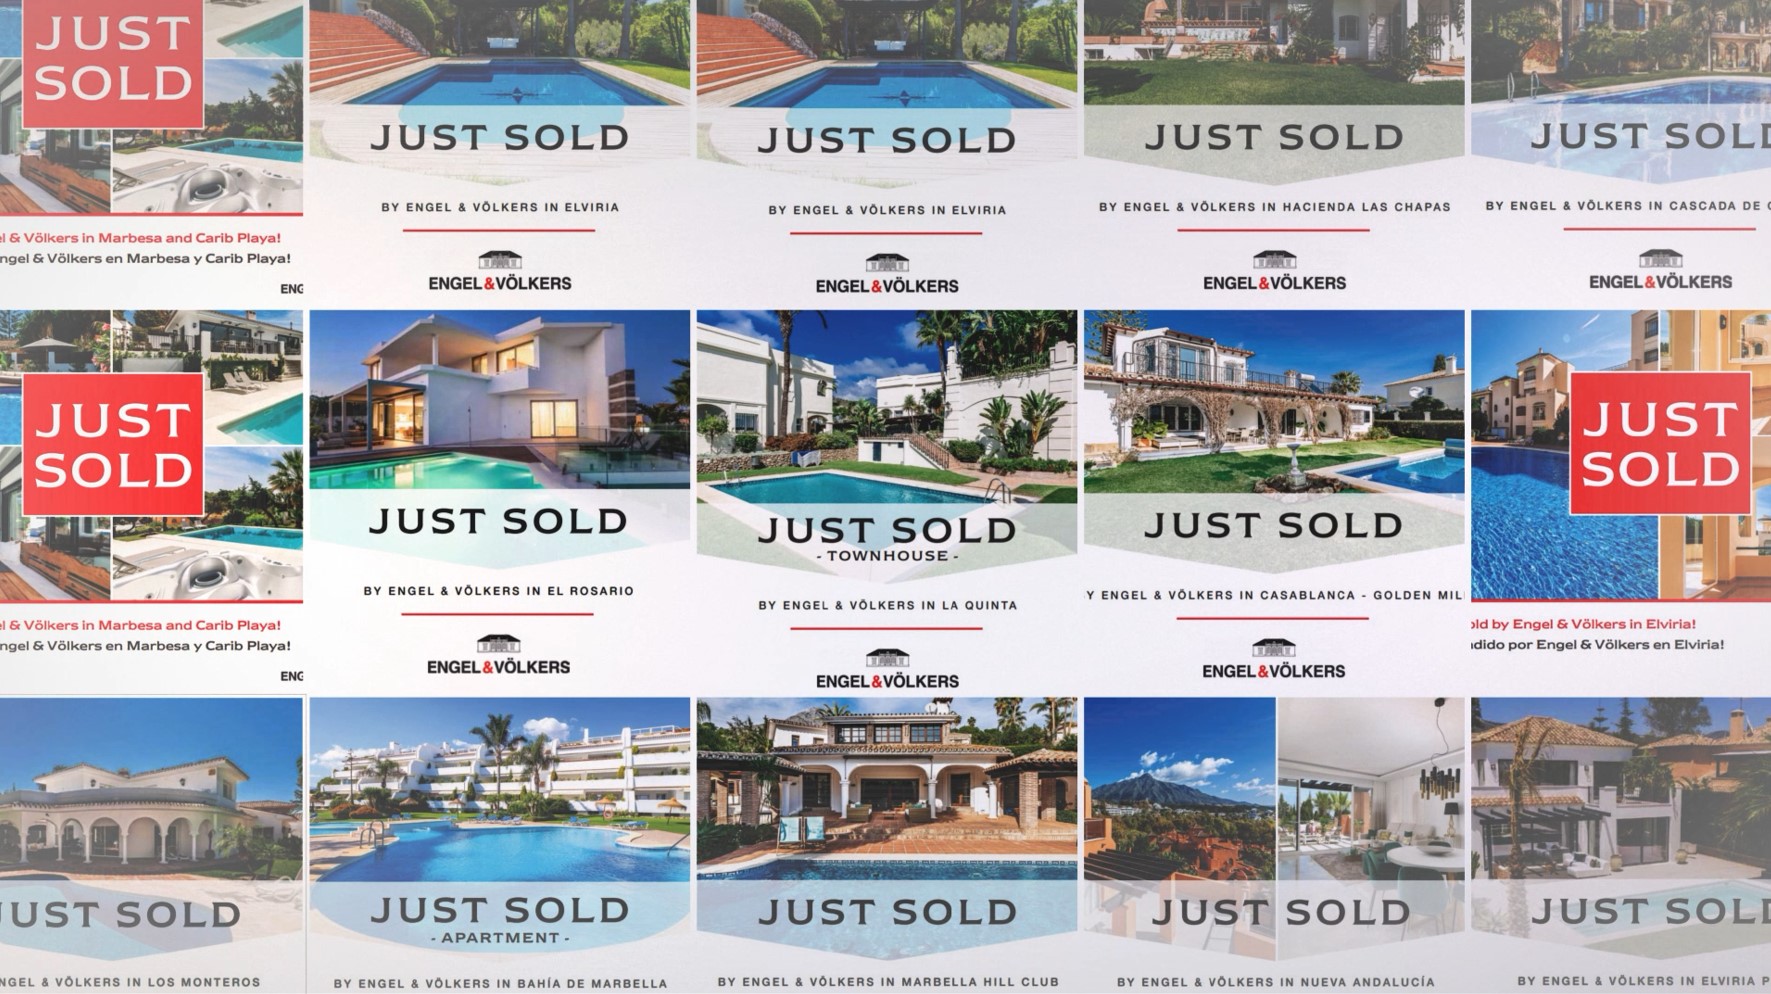 In 240 days we have sold more than 240 properties